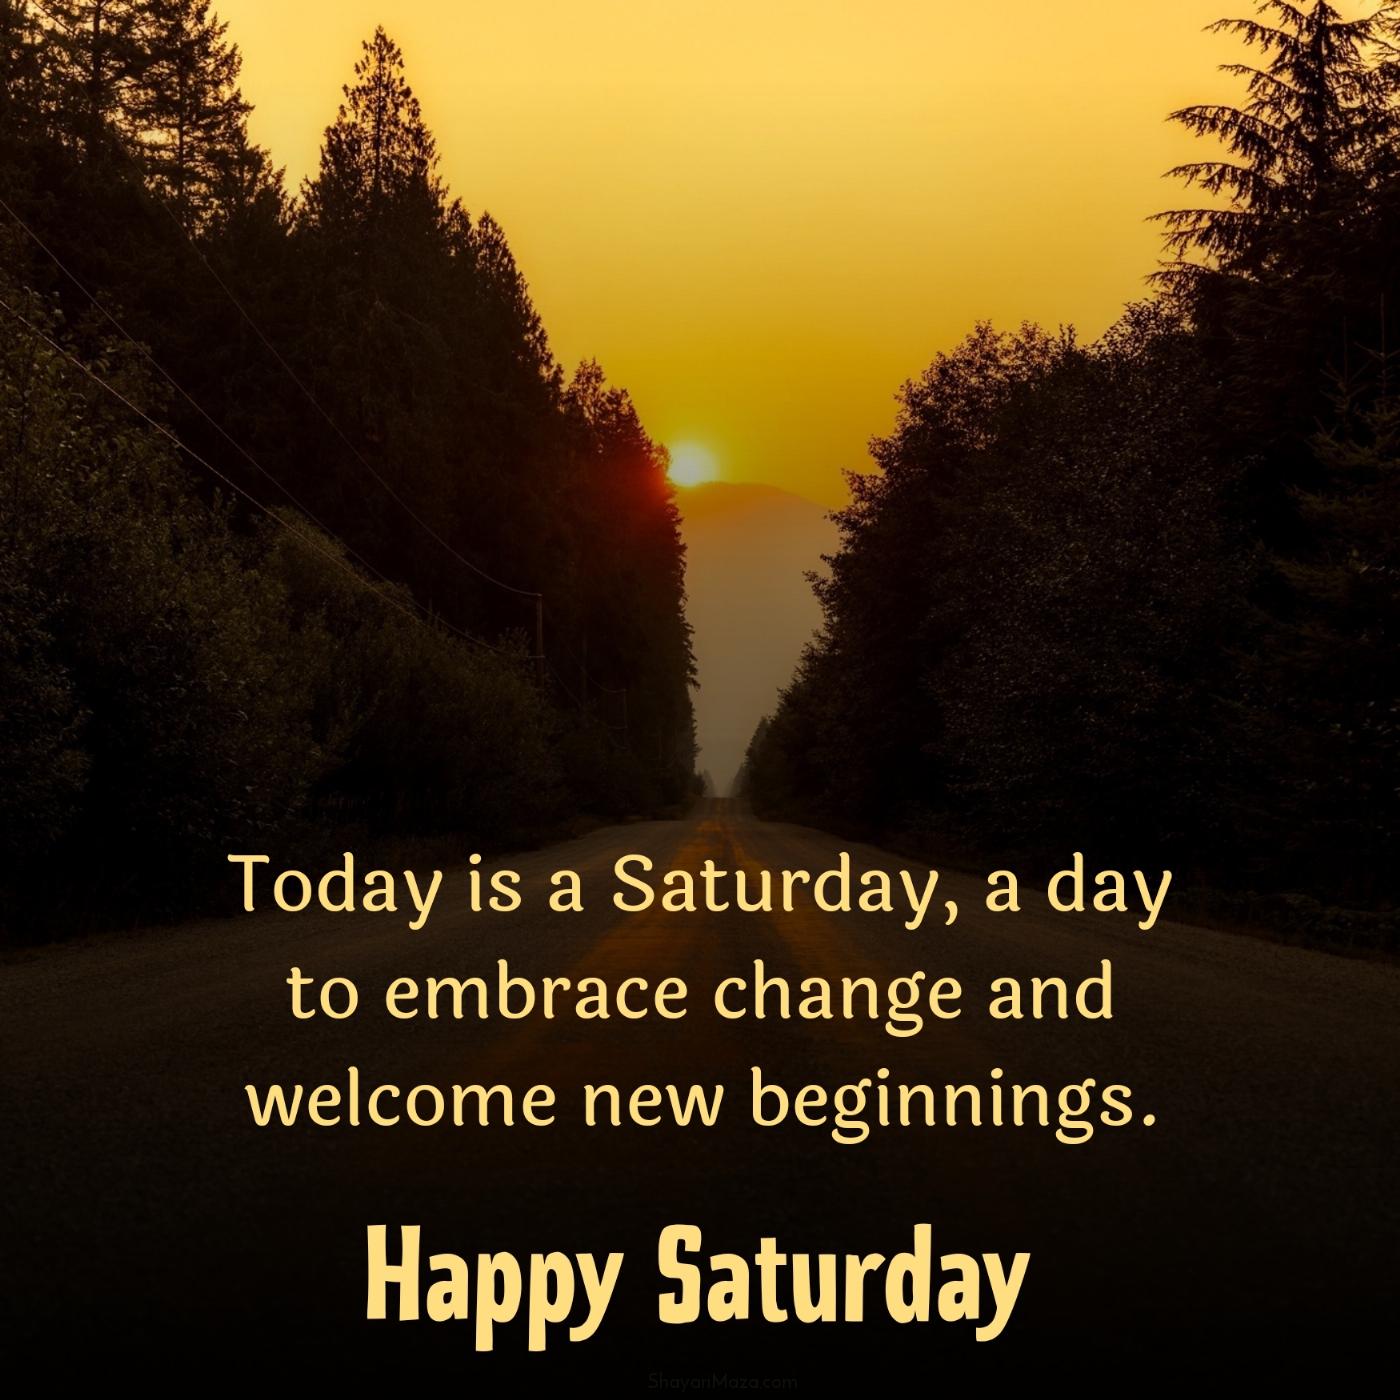 Today is a Saturday a day to embrace change